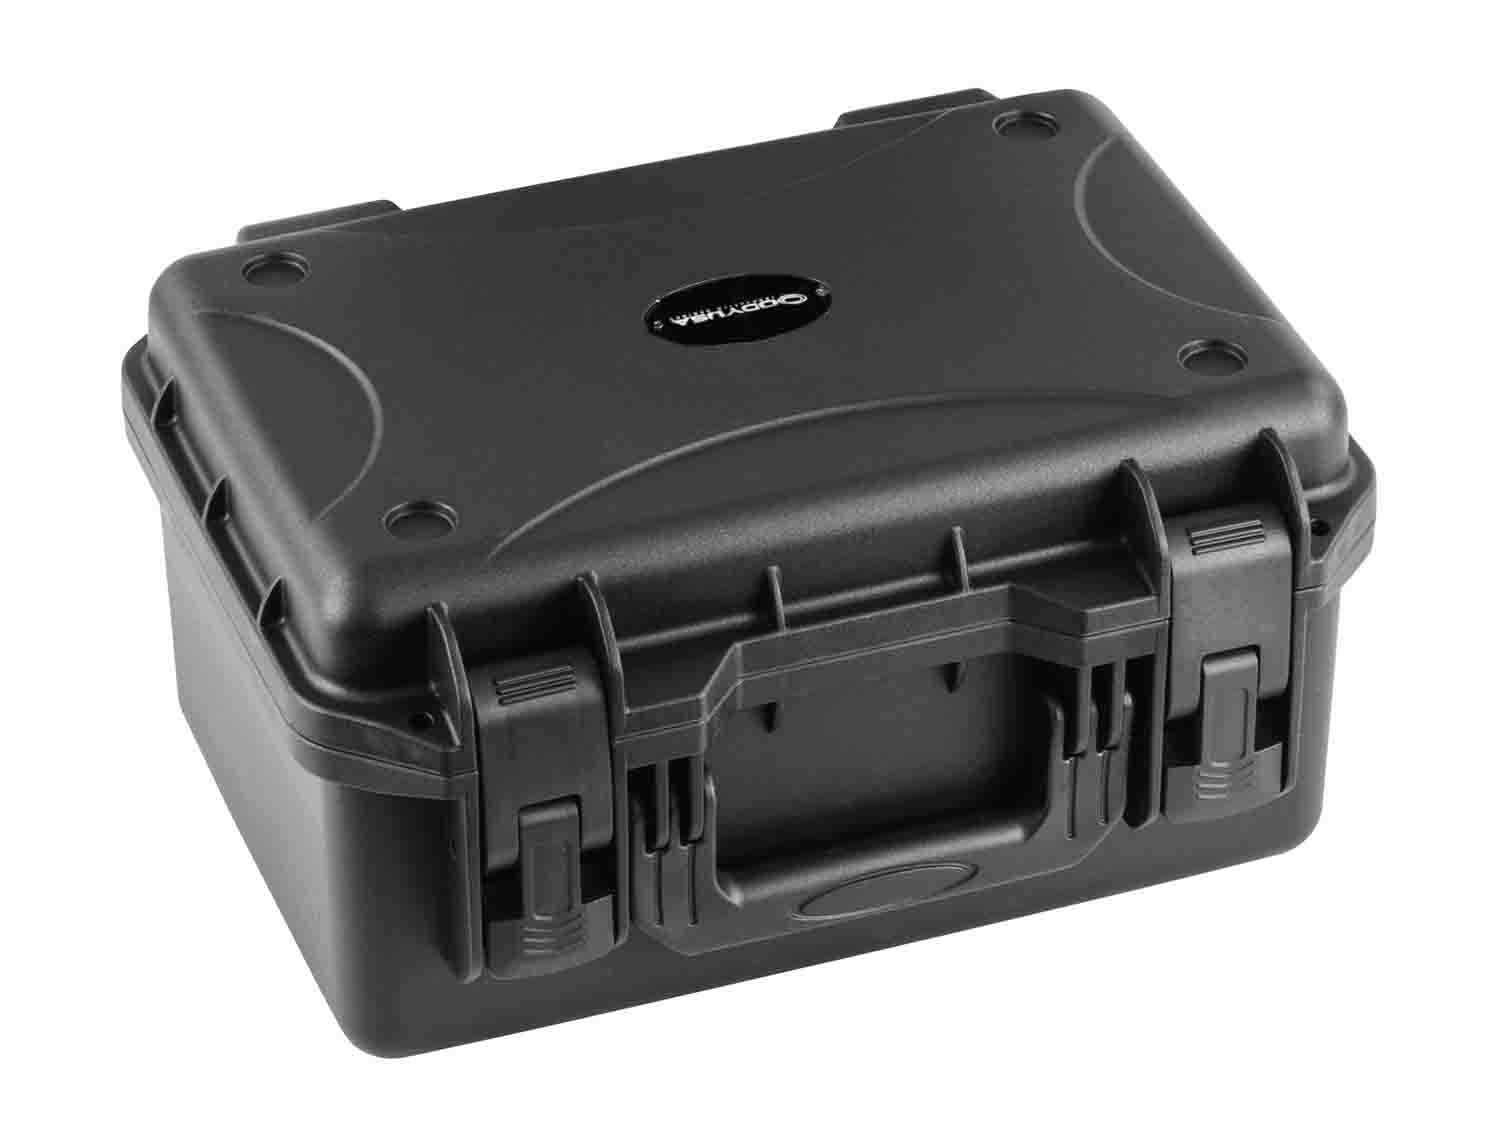 Odyssey VU120806NF Vulcan Injection-Molded Utility Case - 13 x 8.25 x 5" Interior - Hollywood DJ